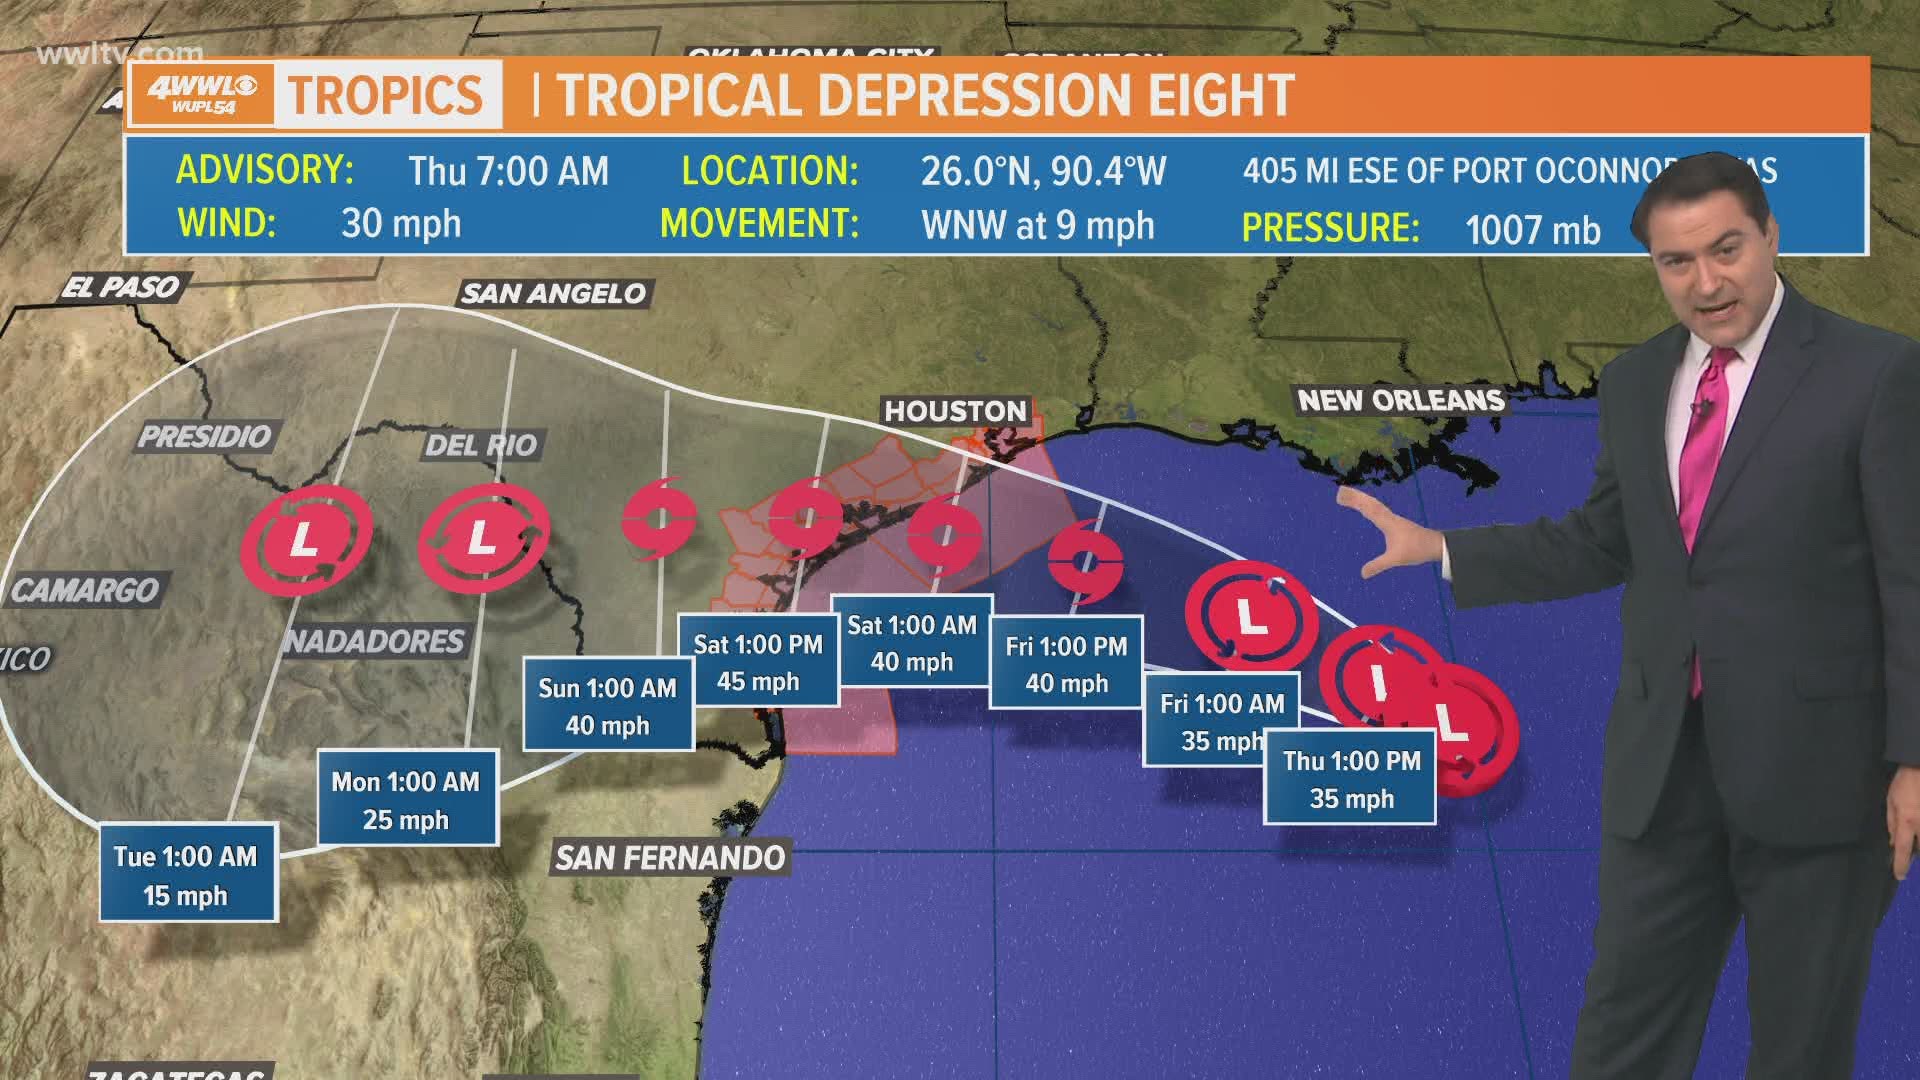 Meteorologist Dave Nussbaum says TD 8 forecast to become TS Hanna on Friday. It will bring us heavy rain today through Saturday with some possible flooding issues.